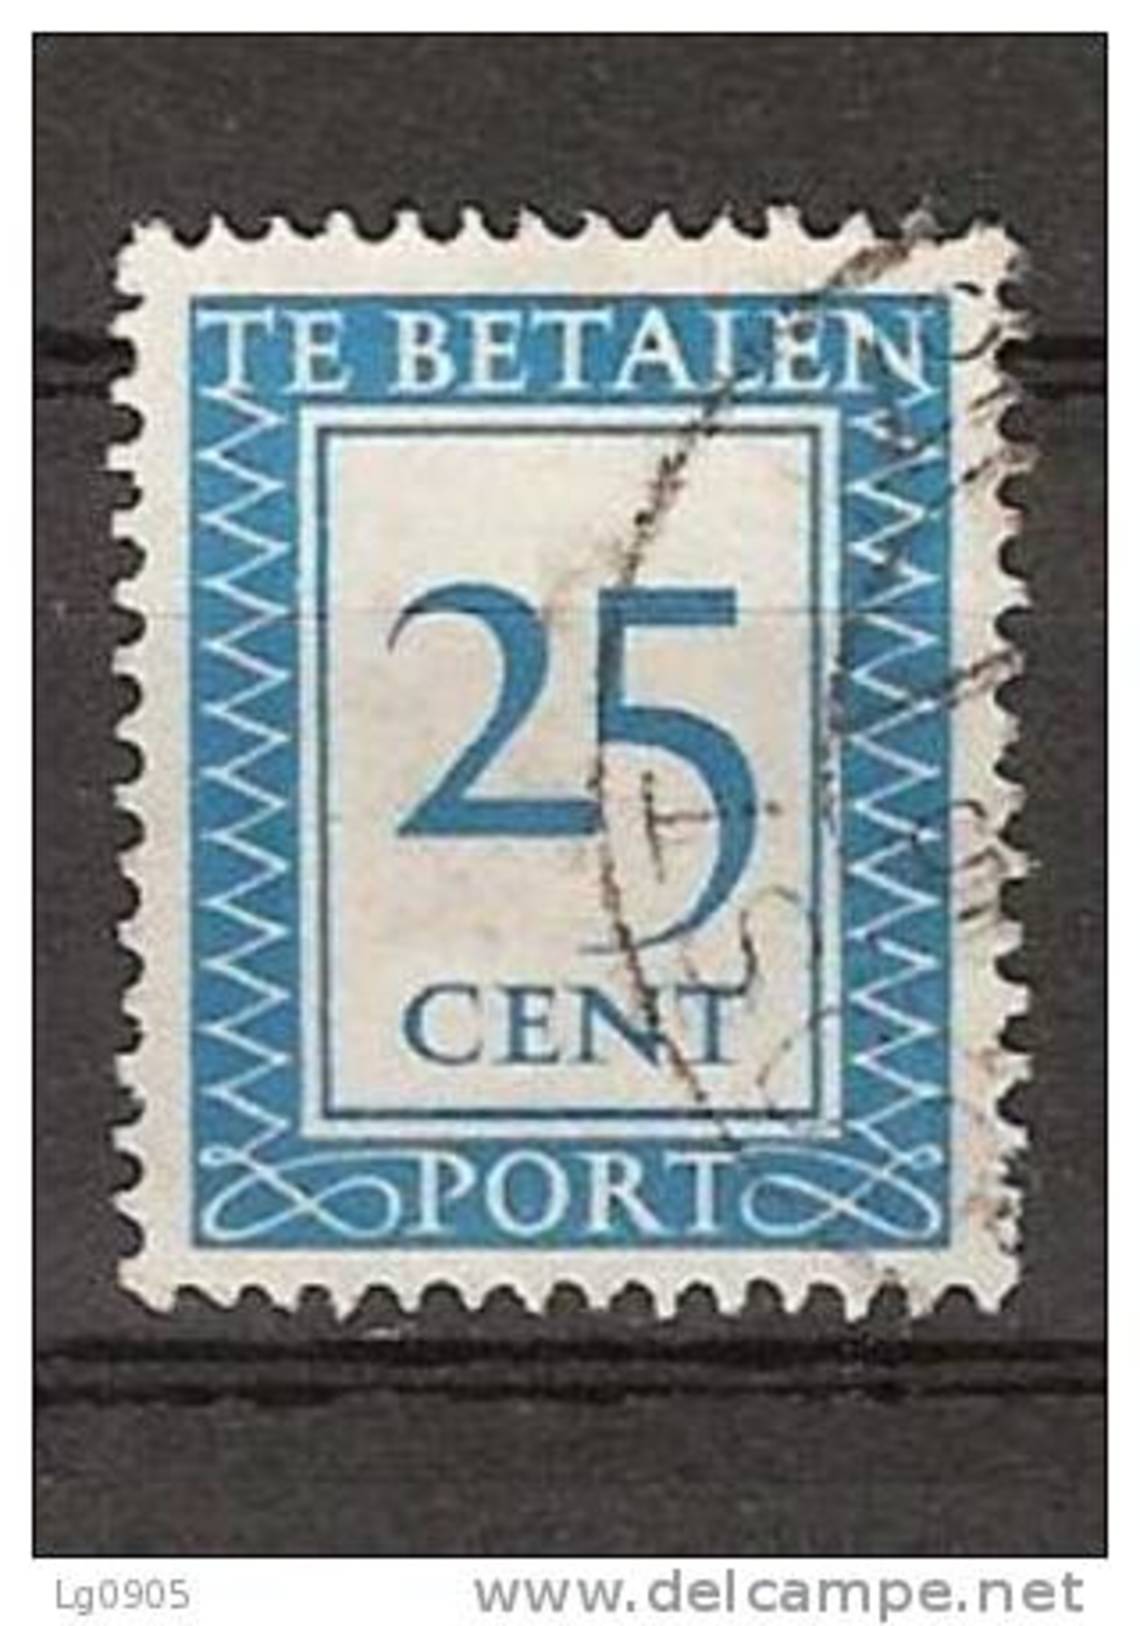 Nederland Netherlands Holanda Pays Bas Port 95 Used Port, Timbre-taxe, Postmarke, Sellos De Correos NOW MANY DUE STAMPS - Postage Due